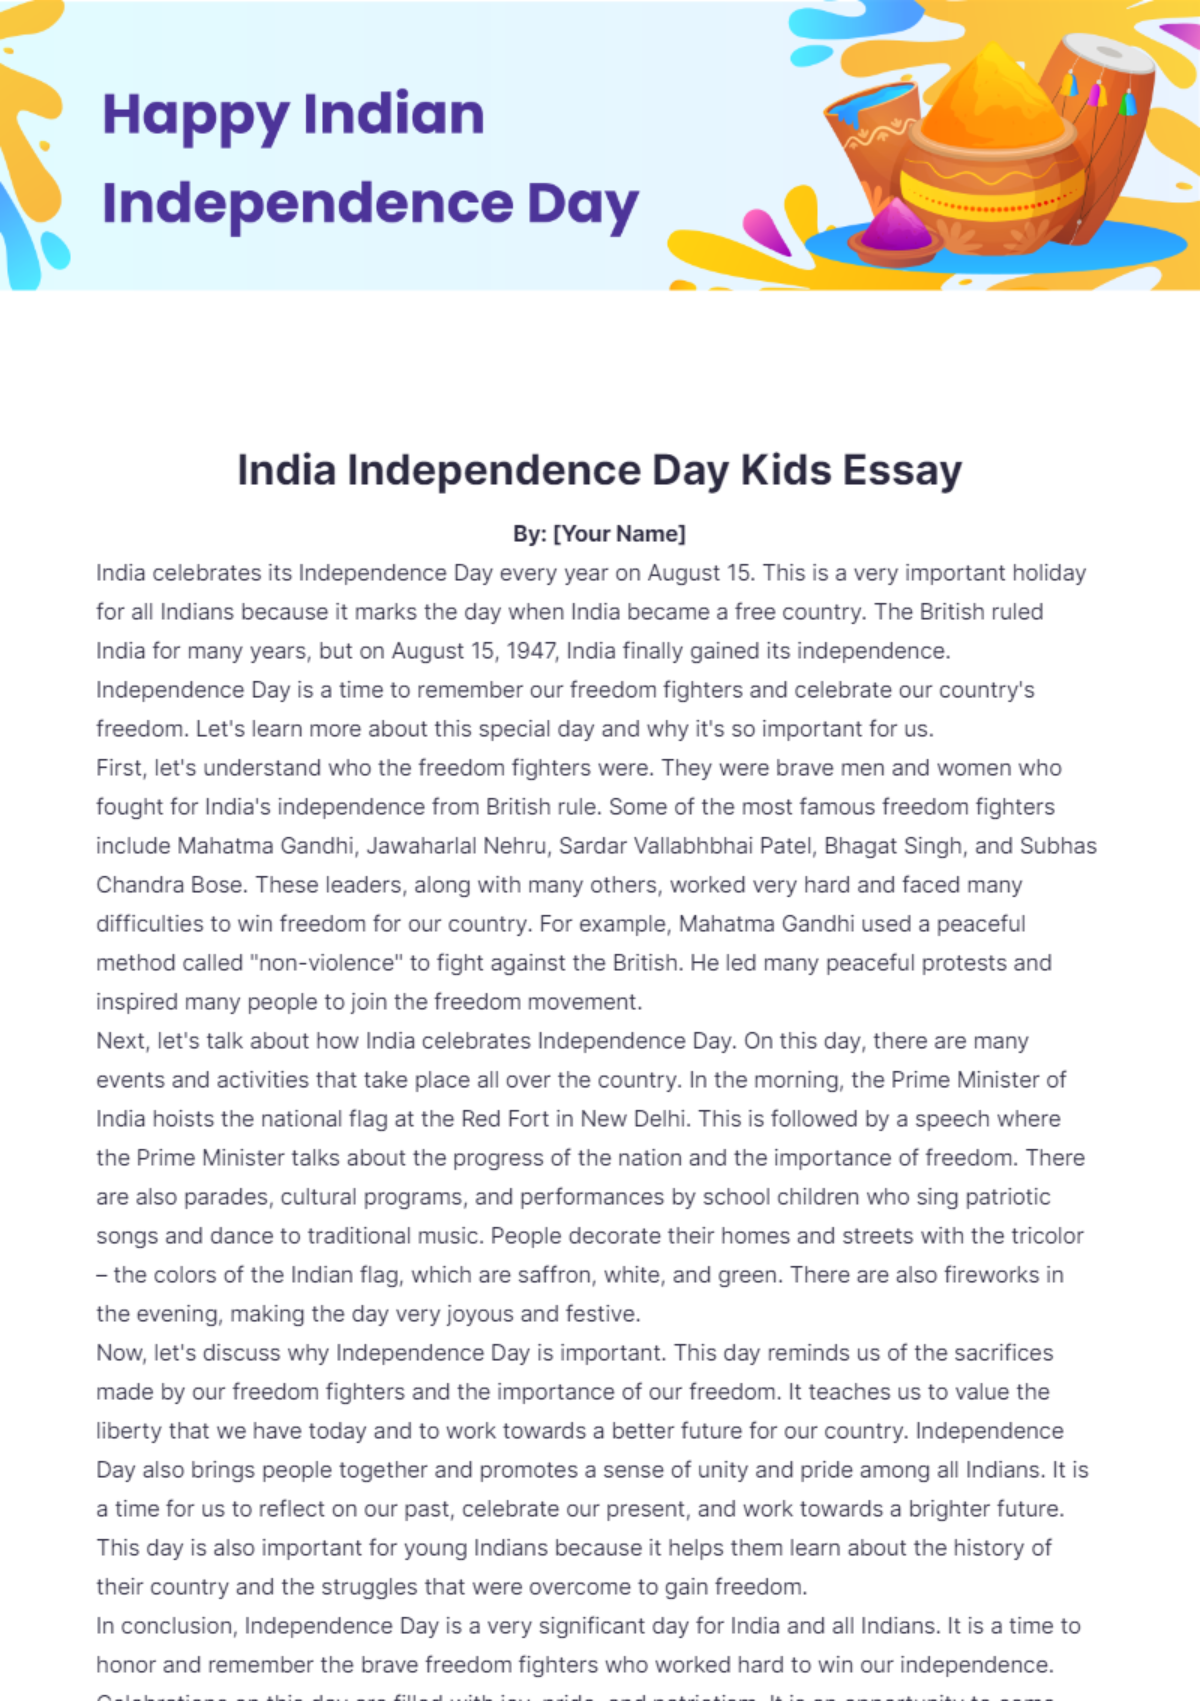 India Independence Day Kids Essay Template